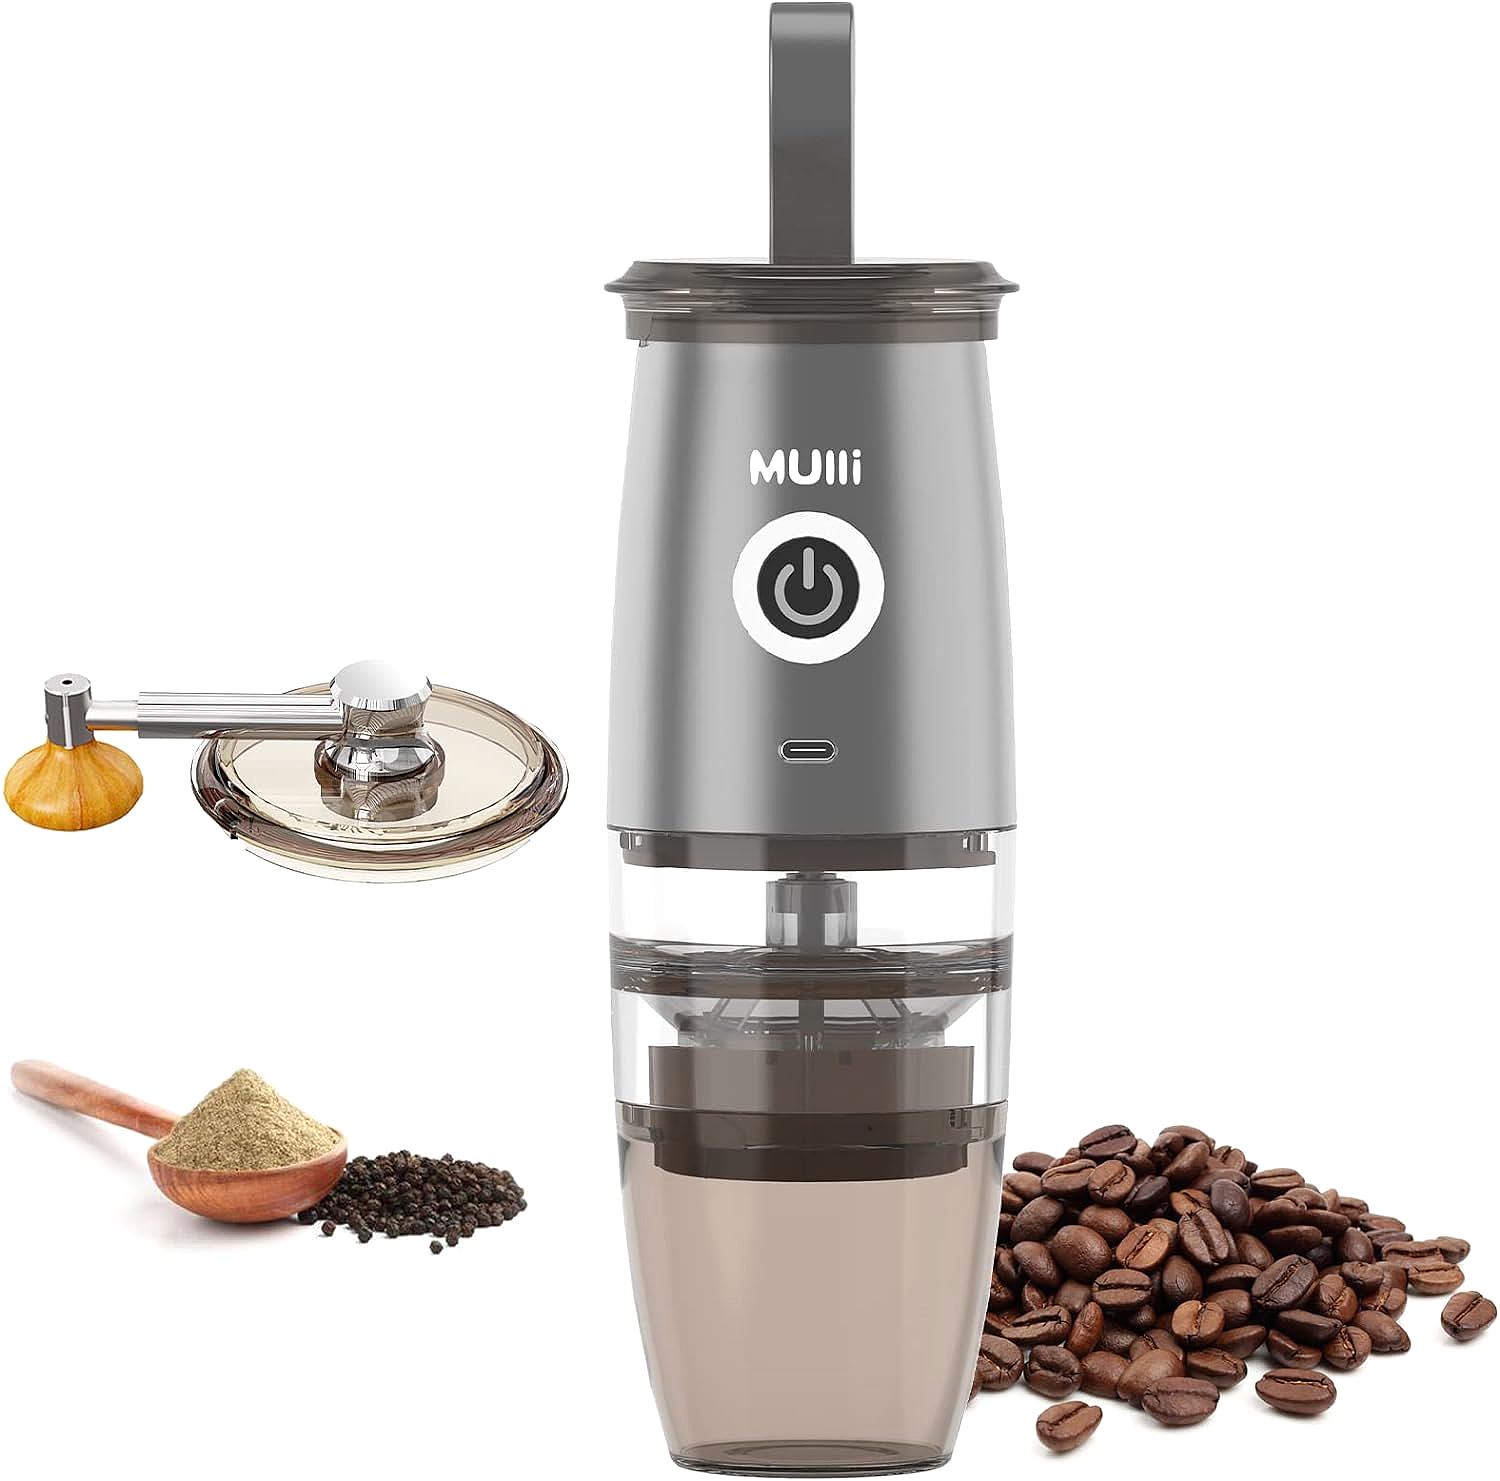 Mulli KF-YM-01 Portable Burr Coffee Grinder: Your Daily Dose of Coffee Heaven